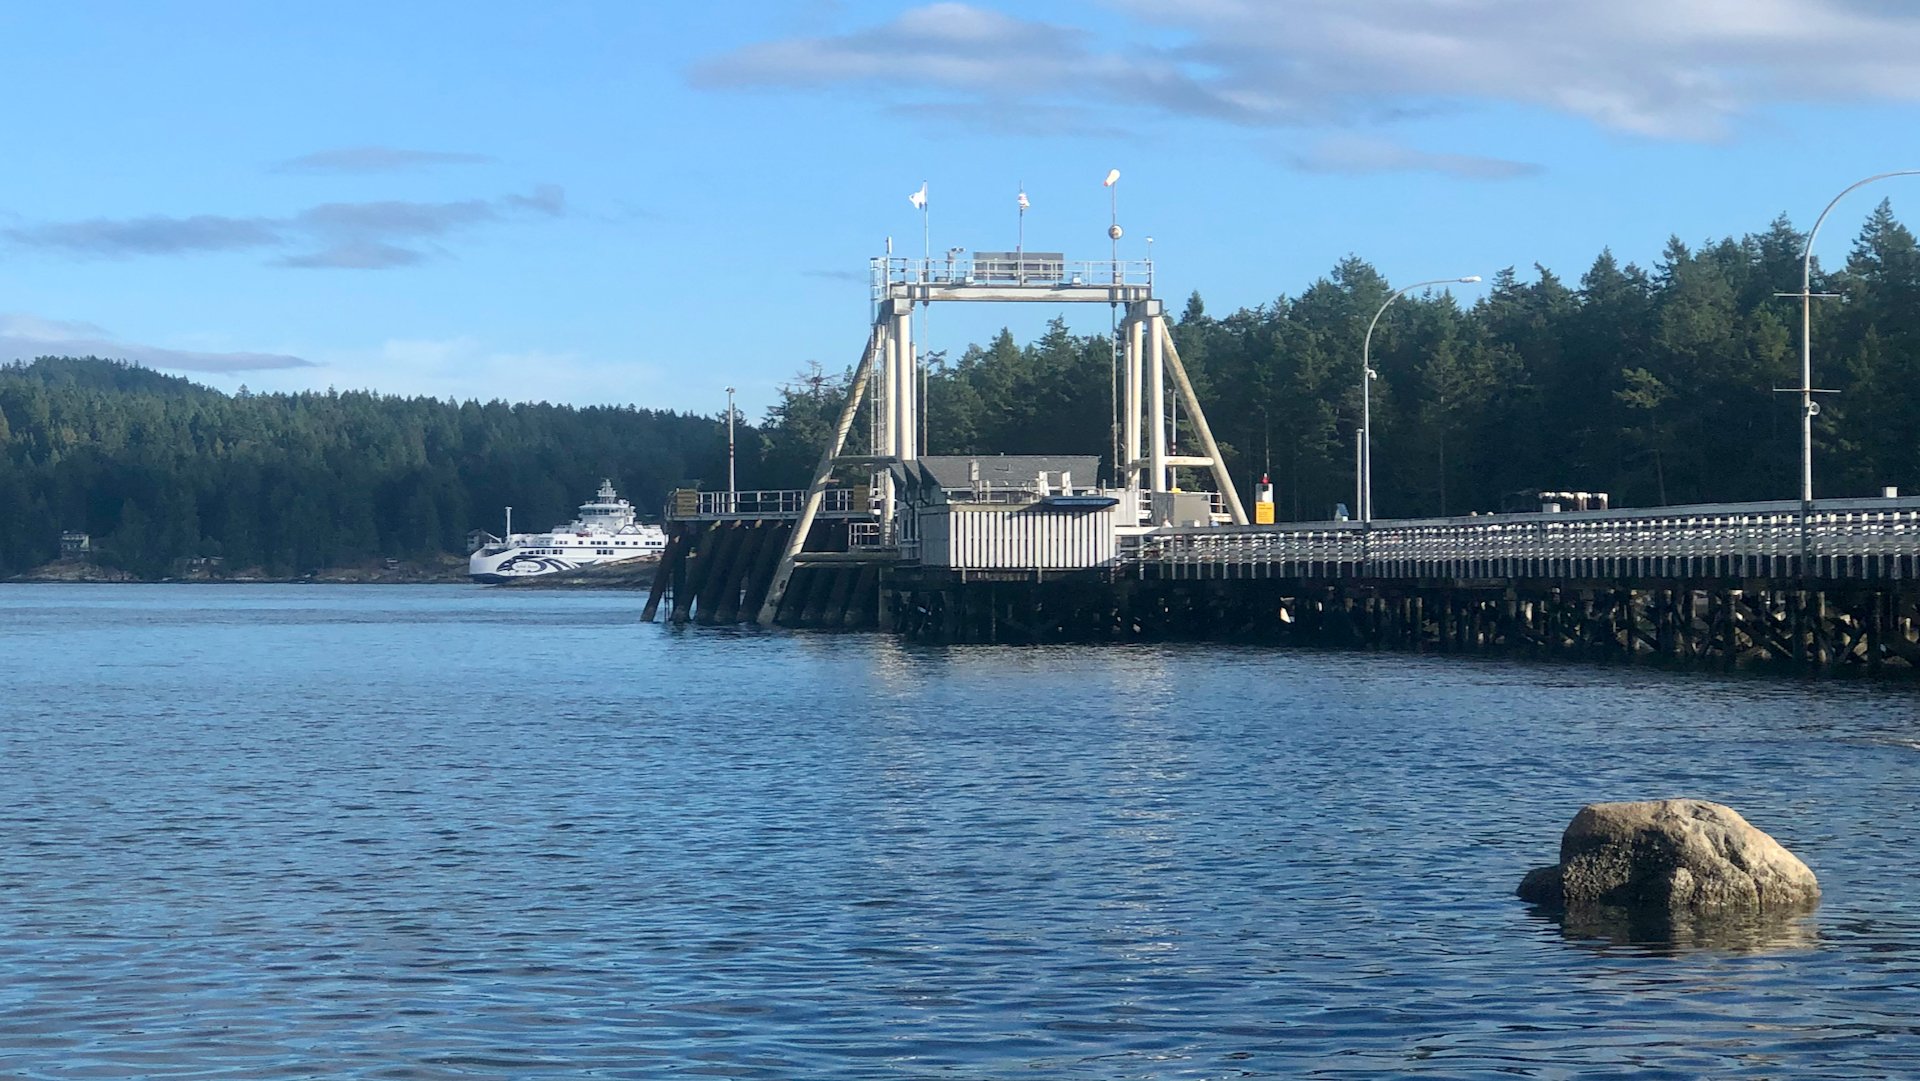  The ferry pulling into the terminal. 